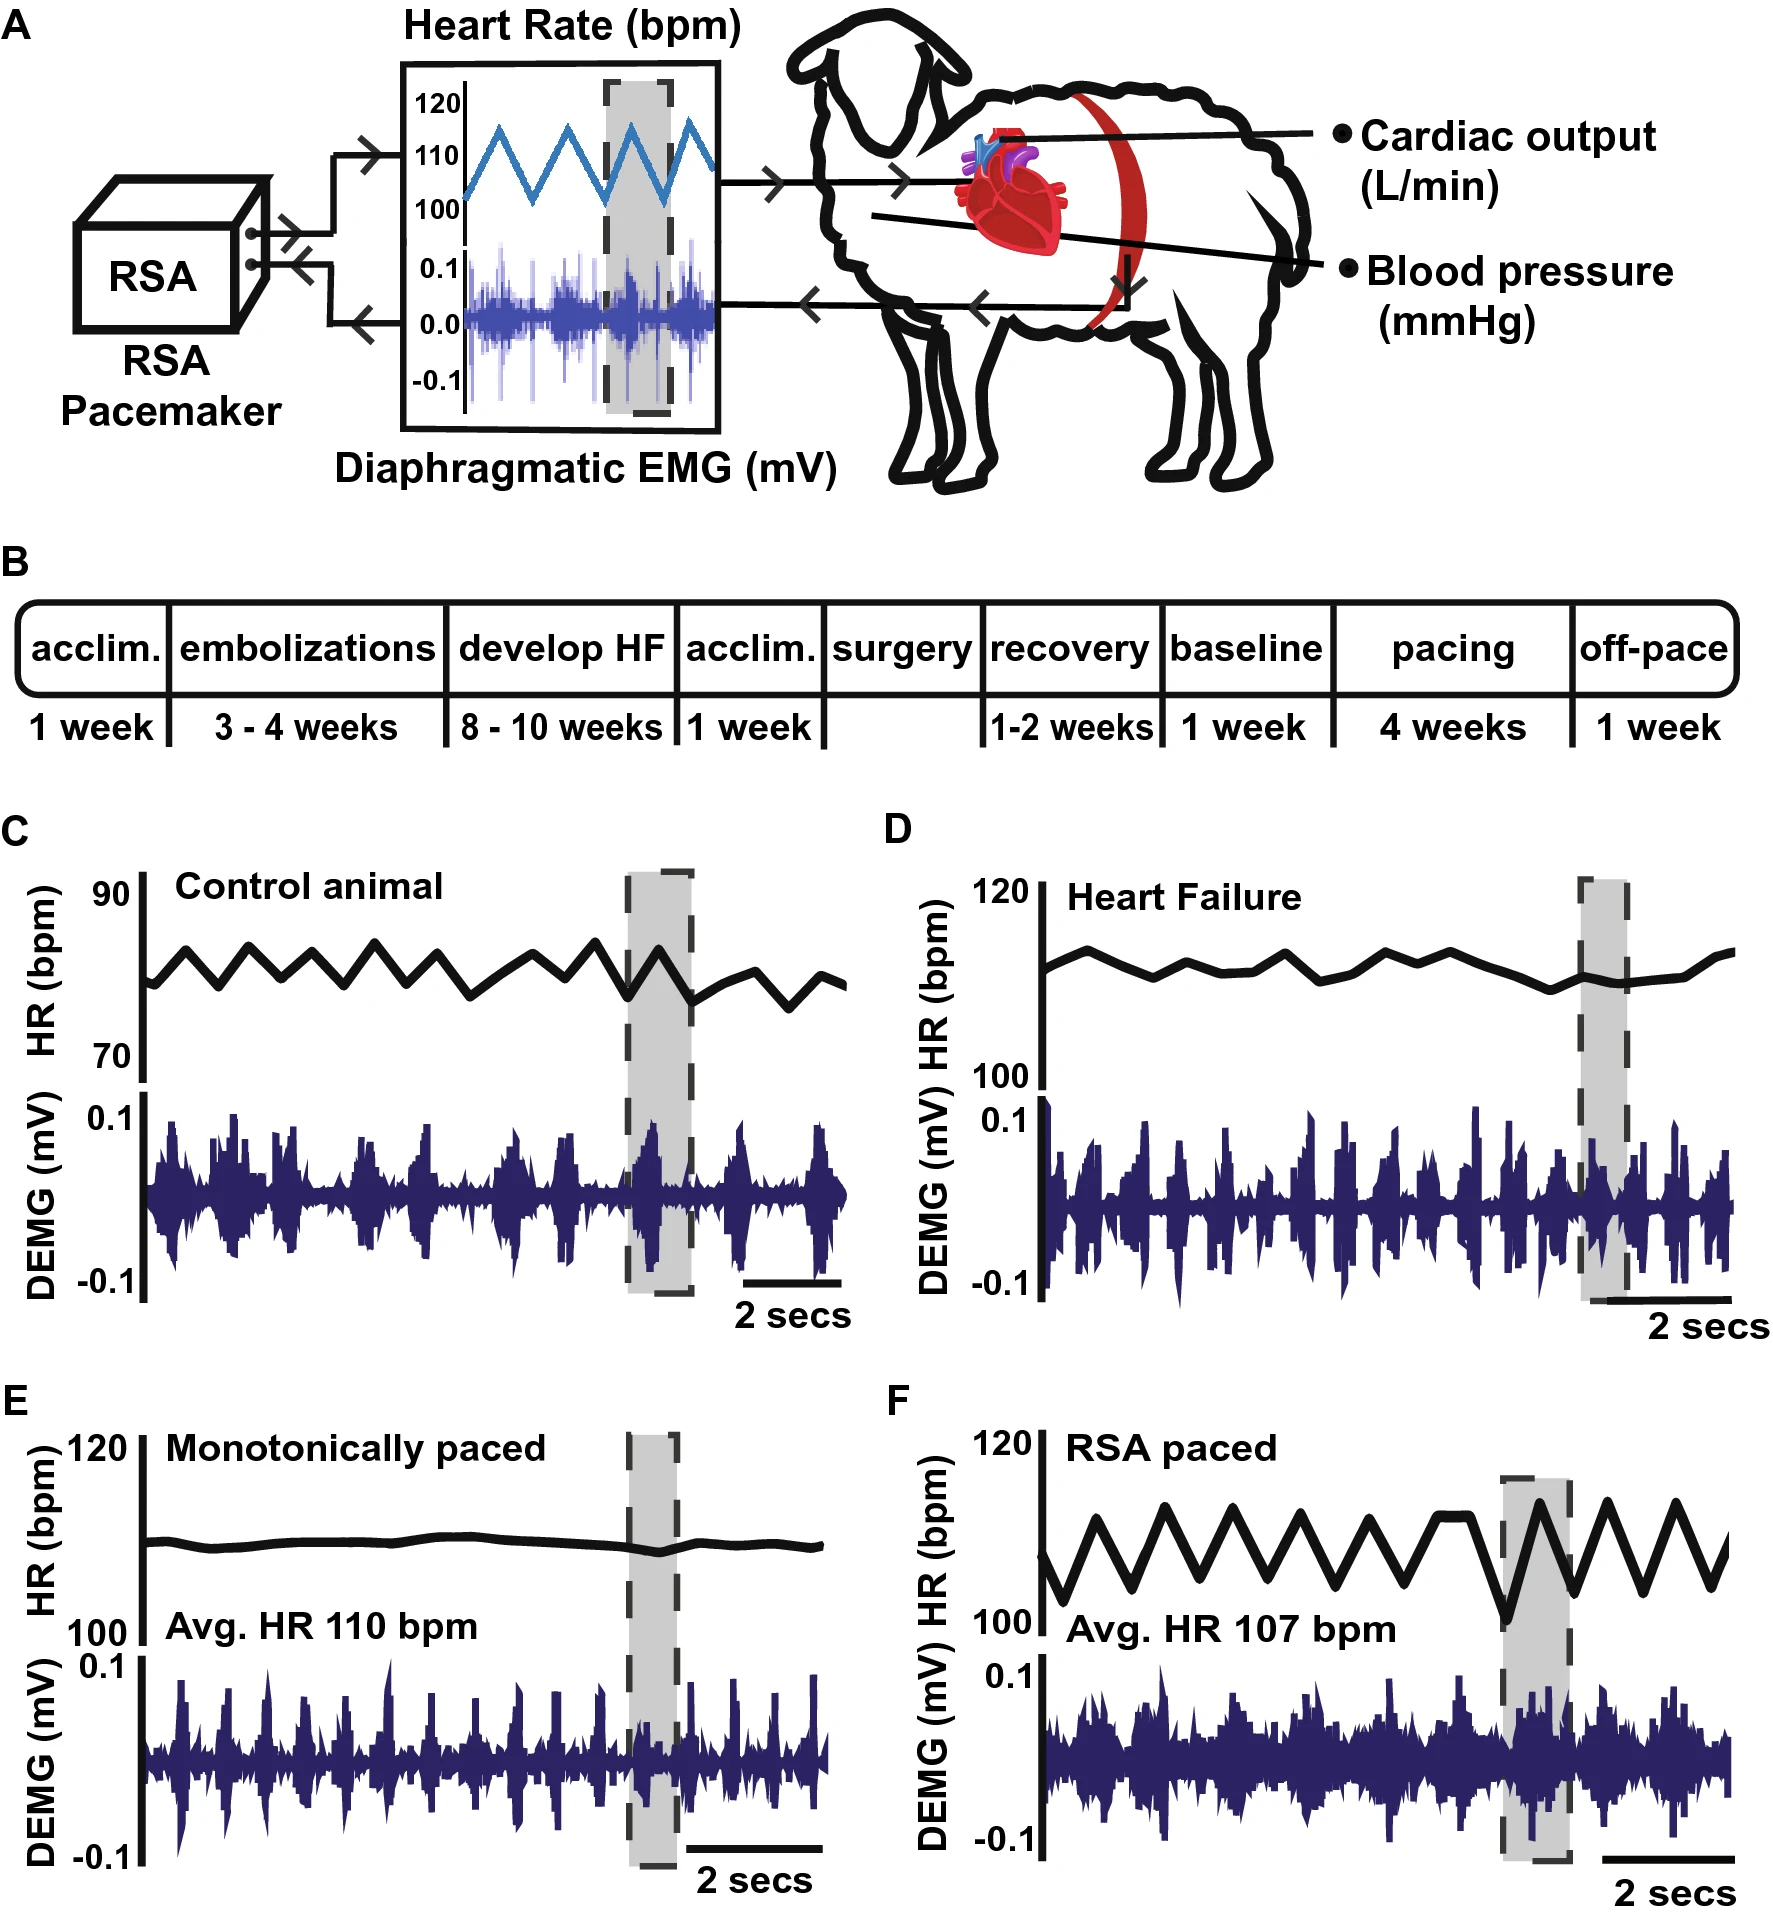 A. Schematic representation of the experimental set-up. Fully instrumented conscious 3–5 year old, outbred, female Romney sheep were paced via the left atrium, 1.5–2.5 V, using a neuron-based pace making device that modulates heart rate in phase with respiration on a breath by breath basis mimicking respiratory sinus arrhythmia (RSA). The device receives diaphragmatic EMG (electromyogram) input to define the phase of inspiration. RSA increases heart rate during inspiration as indicated by the highlighted regions in panels A, C–F Cardiac output was measured on a beat by beat basis using an implantable flow probe attached to the ascending aorta. B Time-line of the six-month experimental protocol. Heart failure with reduced ejection fraction was induced by microembolization and followed by an 8–10 week holding period for chronic heart failure to develop prior to pacing. Following instrumentation and stabilization of hemodynamics parameters, animals were divided into three groups: two were paced (RSA or monotonically) and one not paced (time control) for 4 weeks. This was followed by 1 week off pacing before animals were anaesthetized for baroreflex testing and cardiac tissue collected for post hoc analysis. C Representative raw data traces from a healthy sheep showing native RSA. D A heart failure sheep showing loss of RSA. E A heart failure sheep paced monotonically, showing a stable heart rate. F A heart failure sheep being RSA paced. Note that there was no difference between the mean heart rate of monotonically and RSA paced sheep. Acclim acclimatization to the laboratory; Avg. average; bpm, beats per minute; DEMG diaphragmatic electromyogram; HR heart rate; mV milli Volts